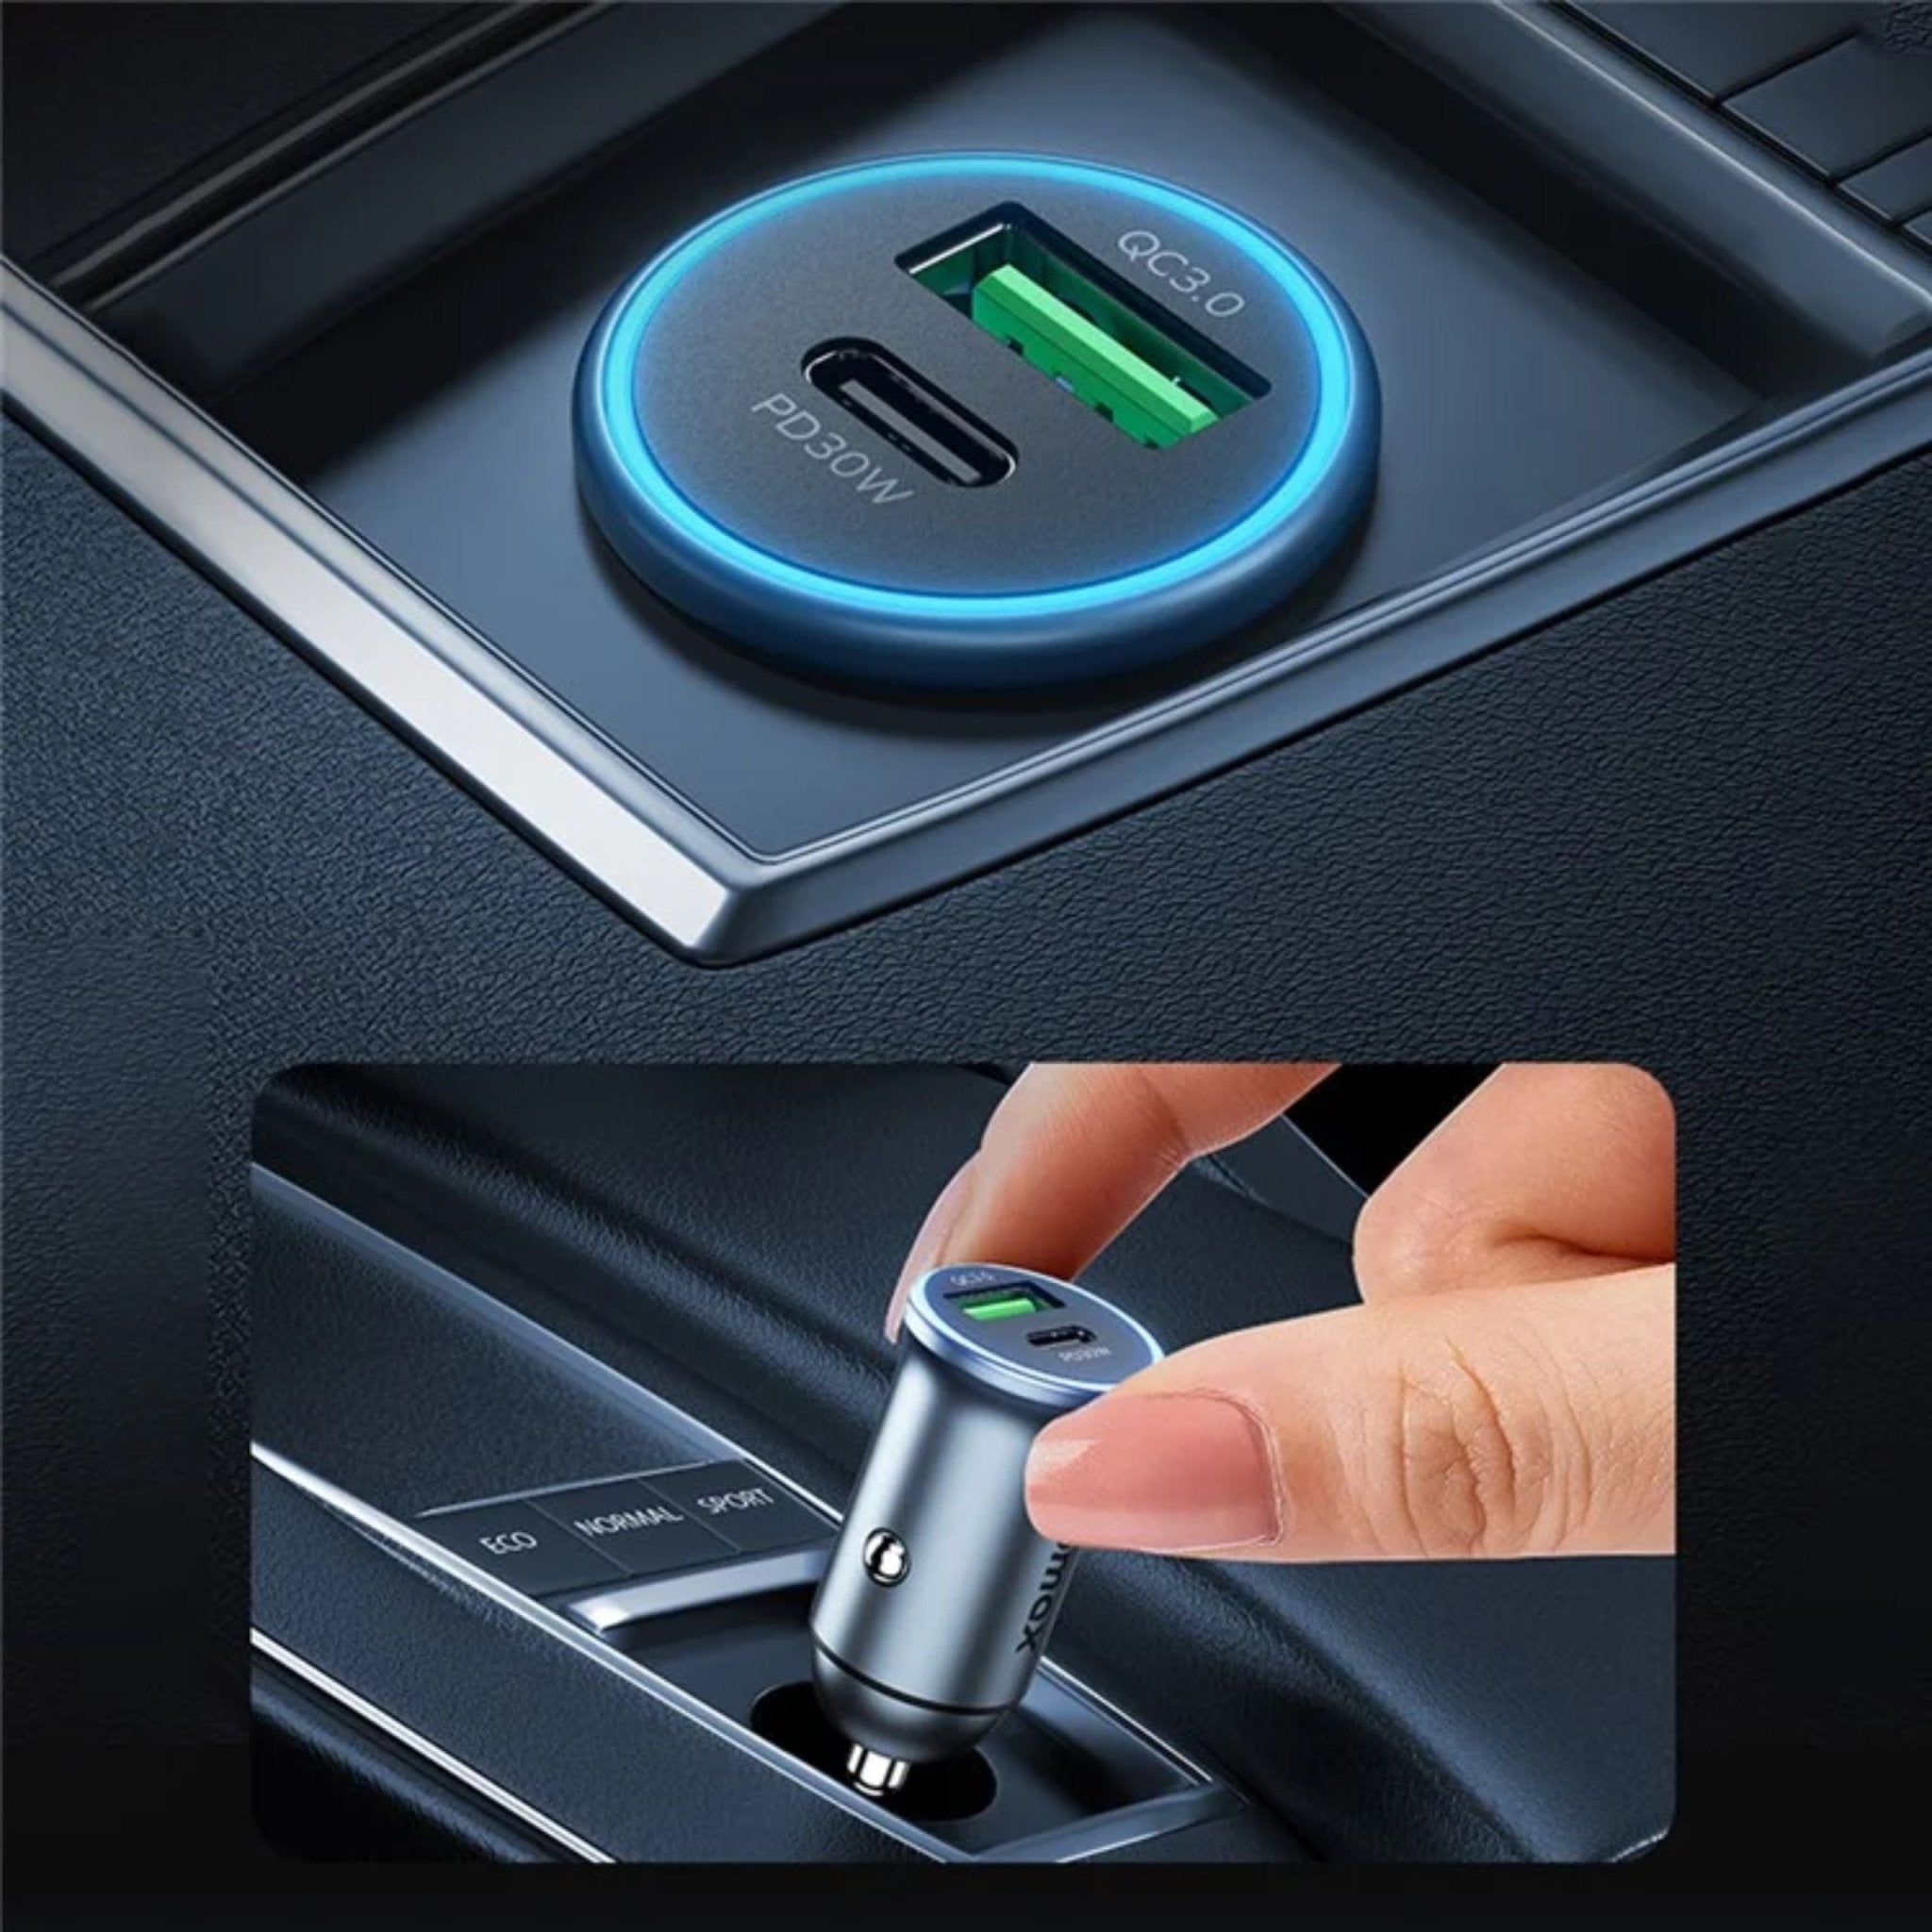 Momax Move 30W Dual Port Car Charger - Gray